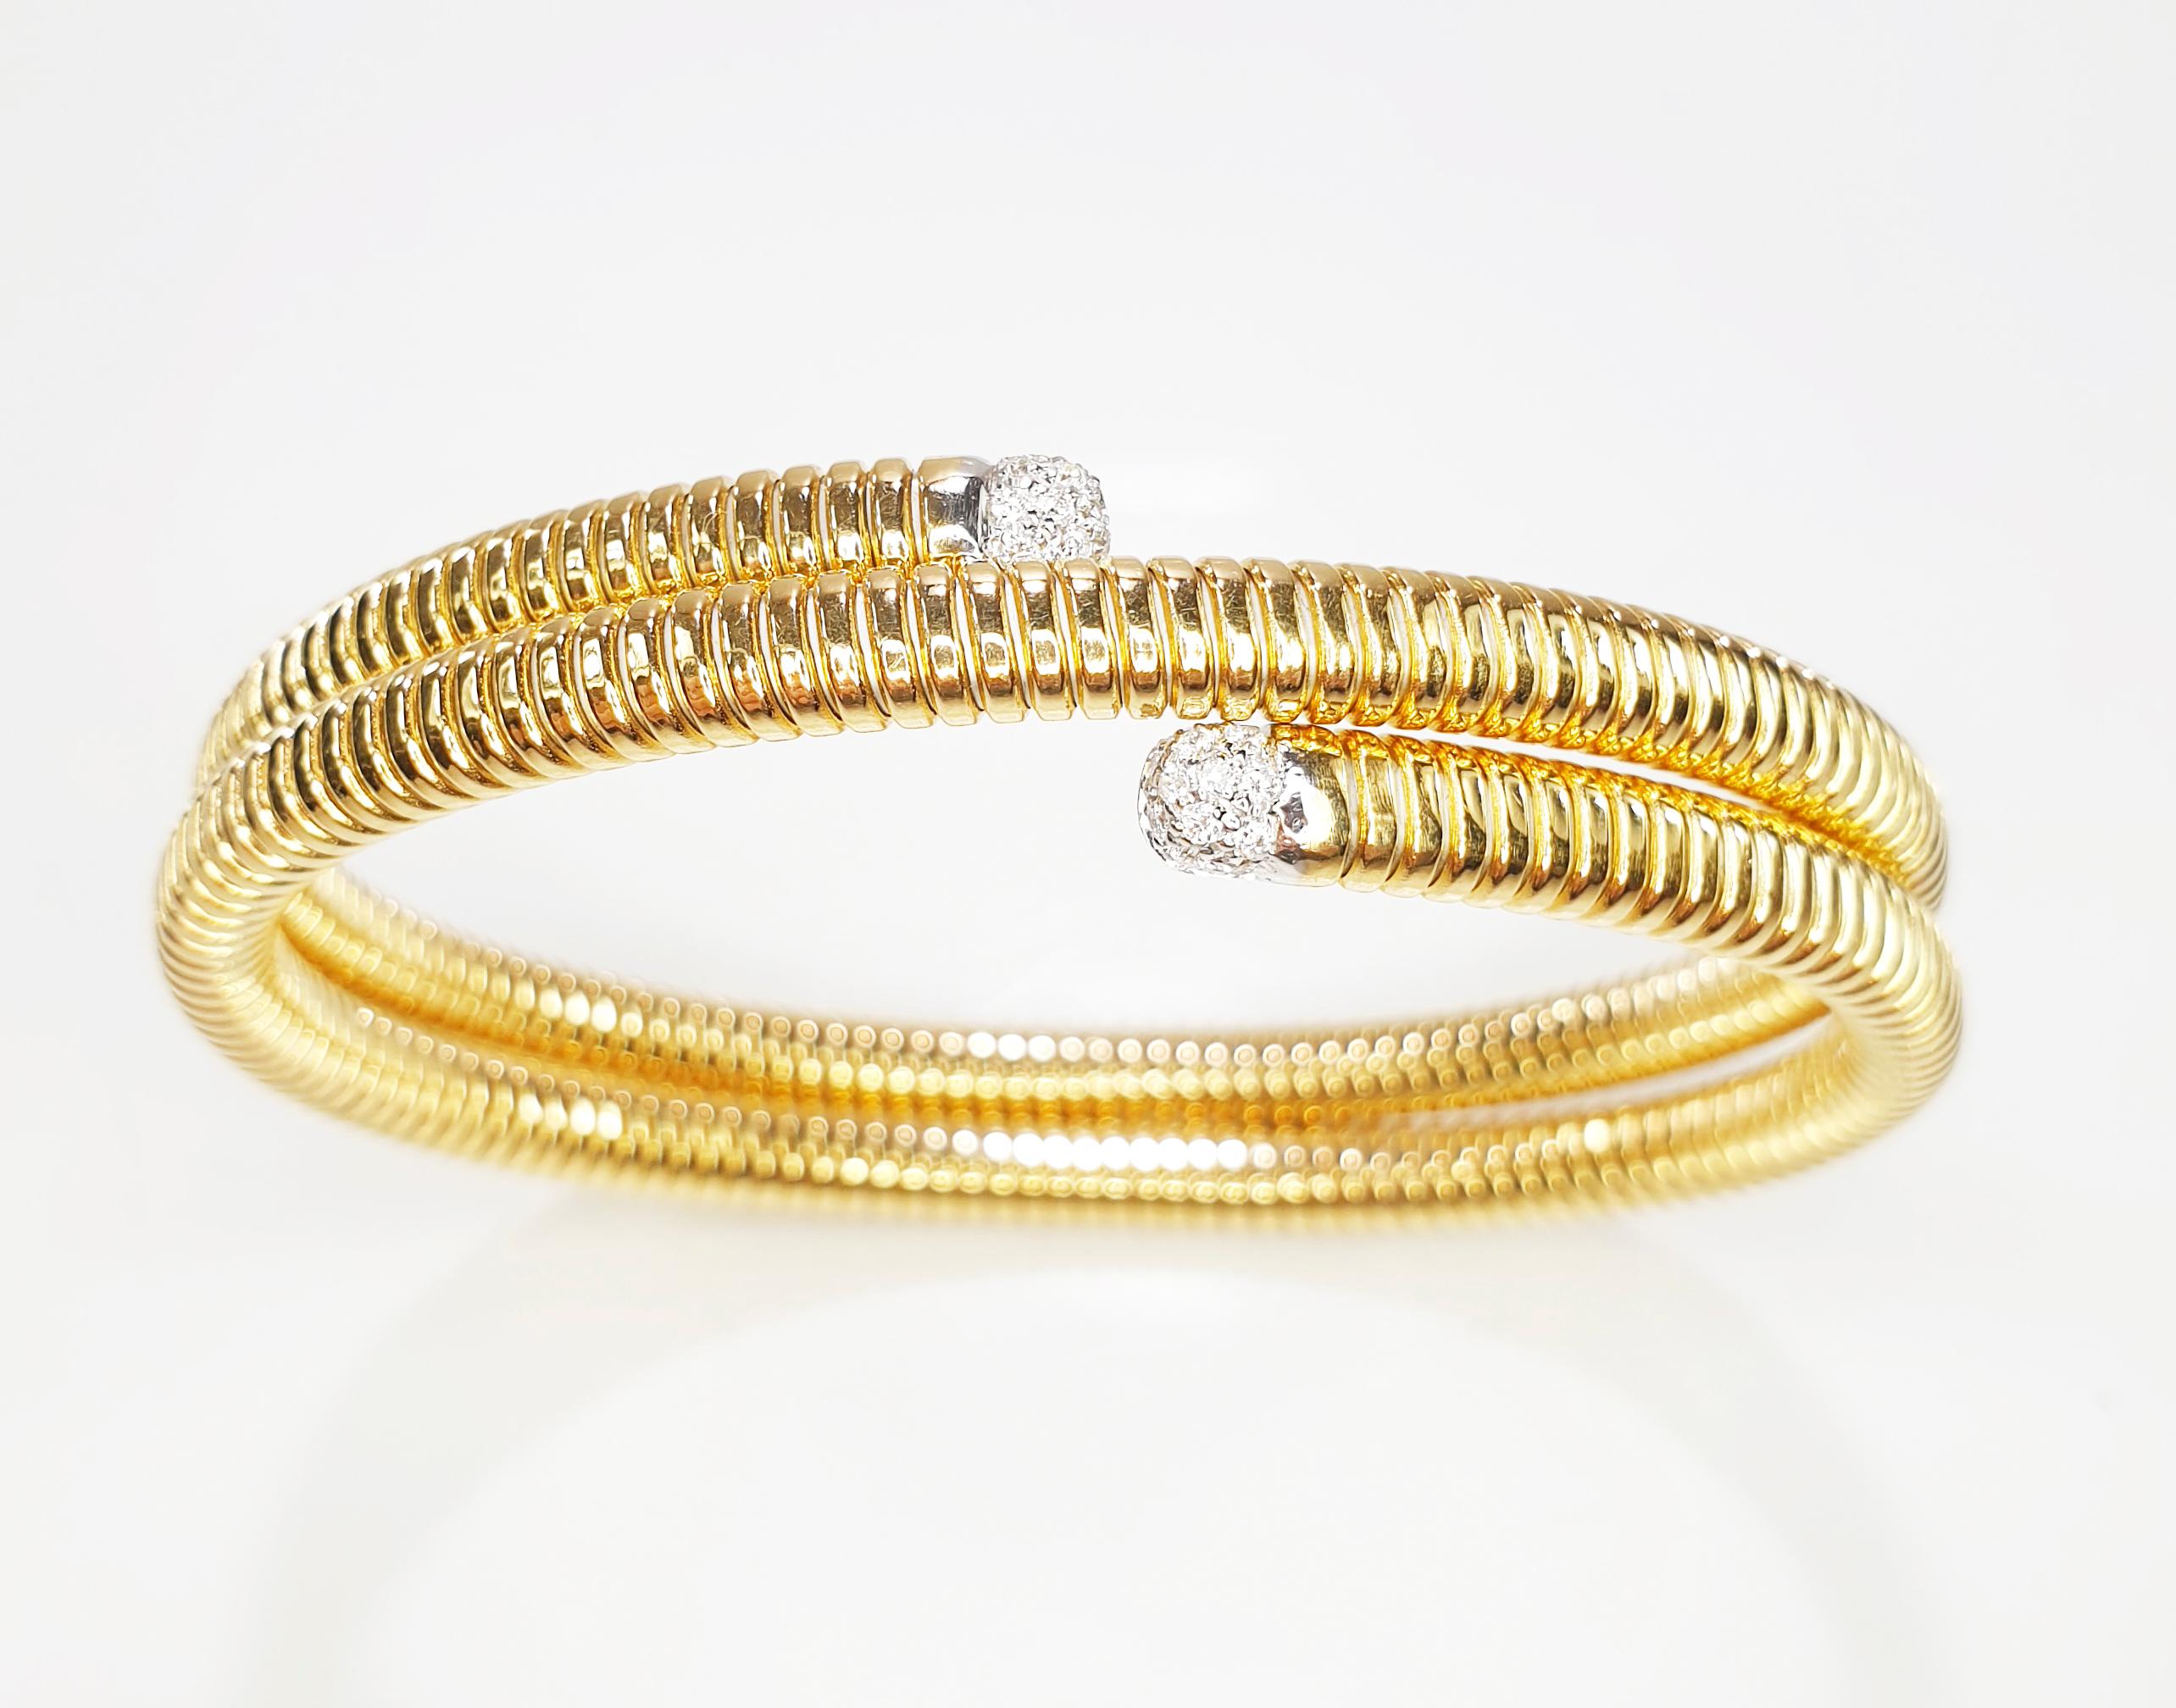 Flexible and adaptable bracelet with tubogas craftmanship that fits medium to large sizes.
Available in three colours of gold, yellow, white and rose.
17,60gr and 0.25Carat Diamonds
Request availability if in stock 5 days handling time
If not in